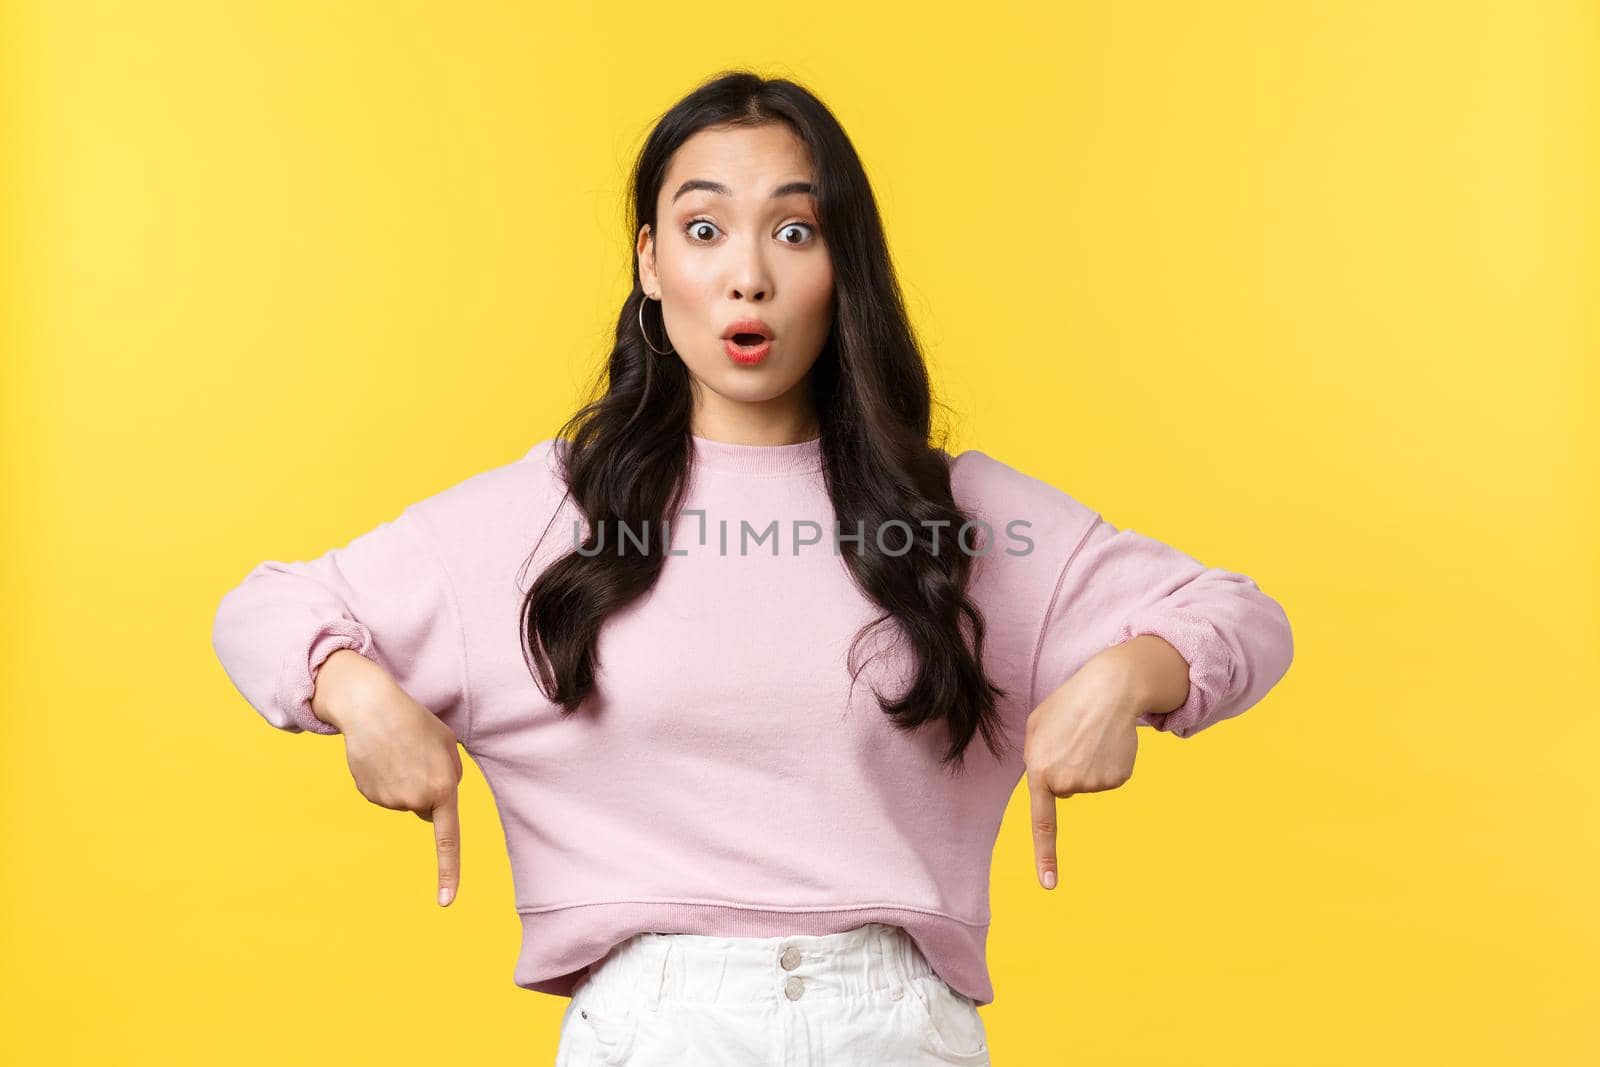 People emotions, lifestyle and fashion concept. Astonished and impressed pretty asian woman in stylish outfit pointing fingers down to show cool promo offer, advertise product over yellow background.